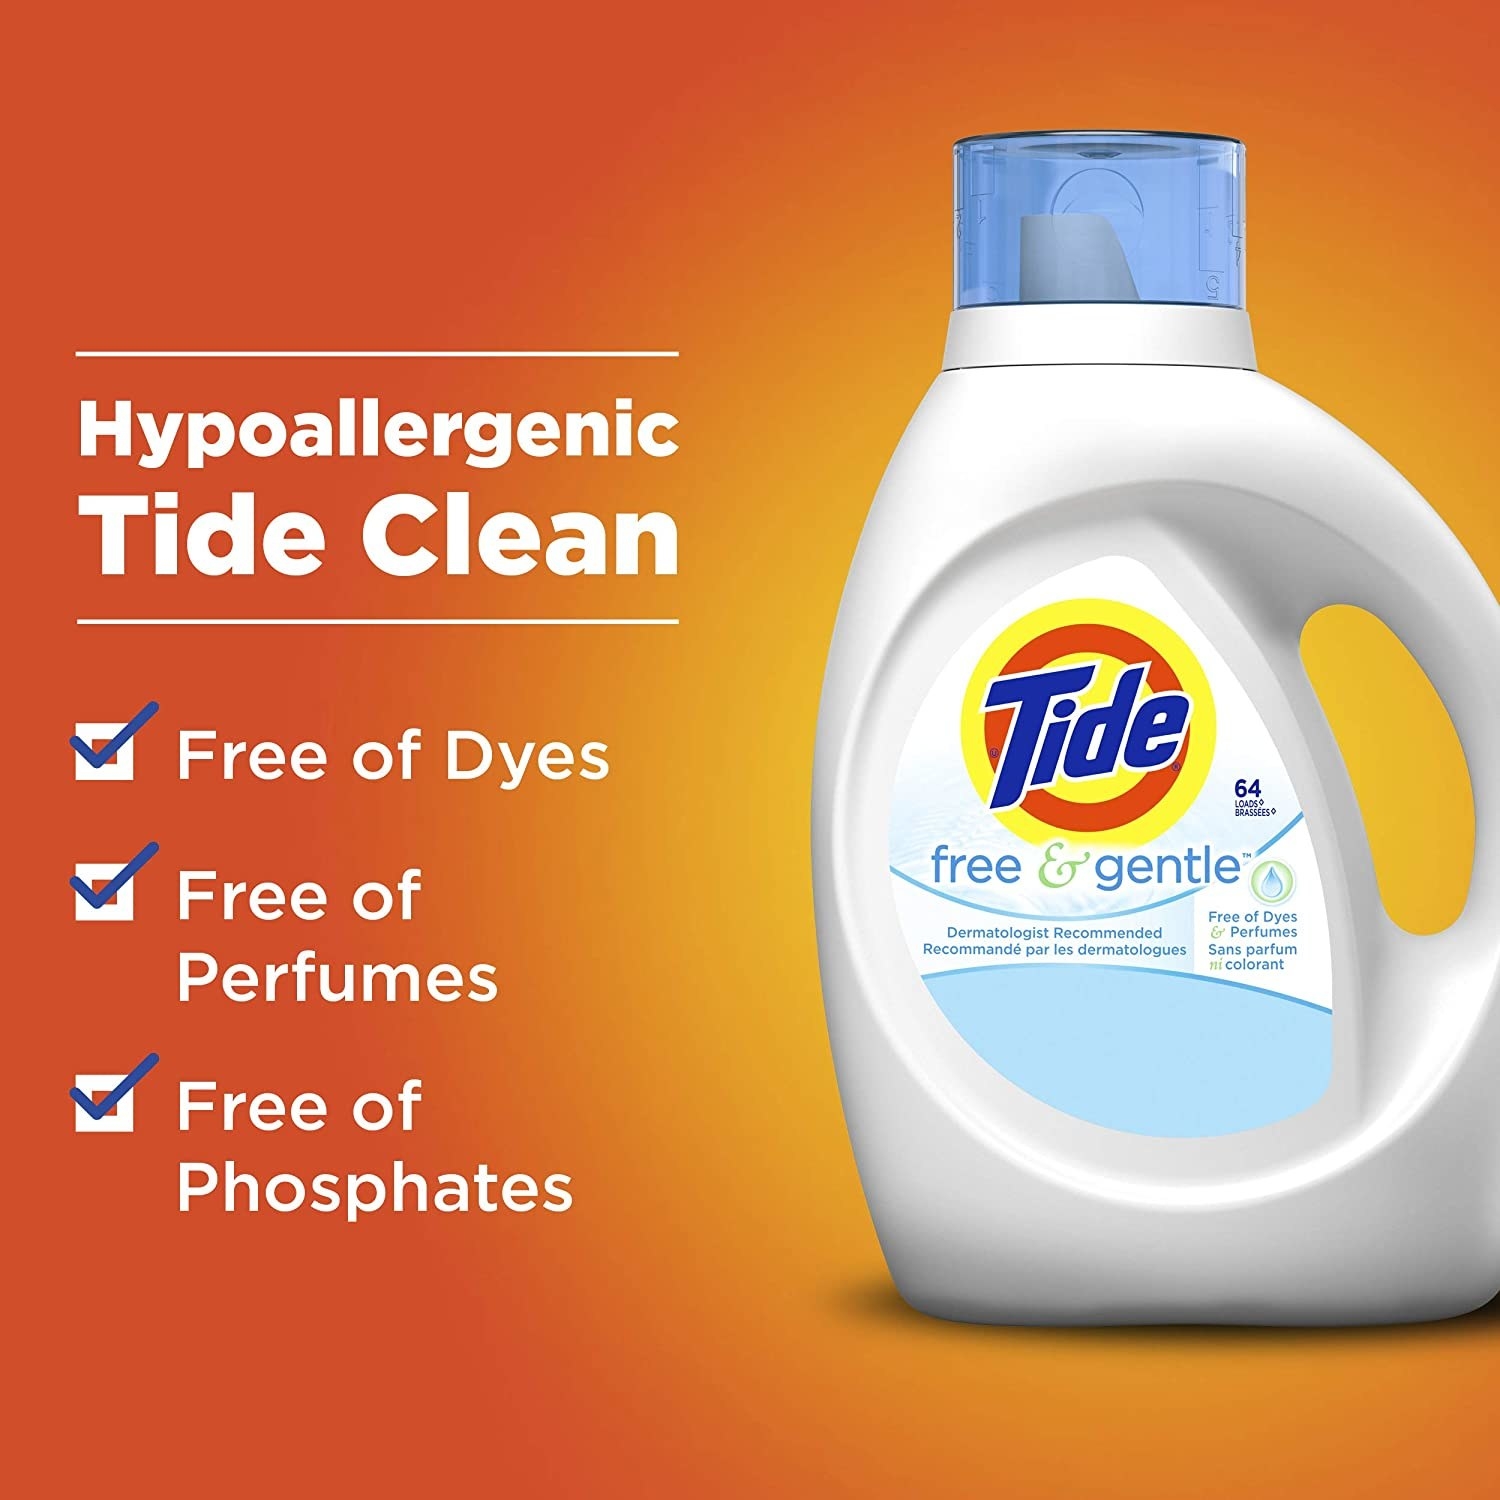 Bottle of Tide free and gentle with a handle on the side and measuring cup on top 